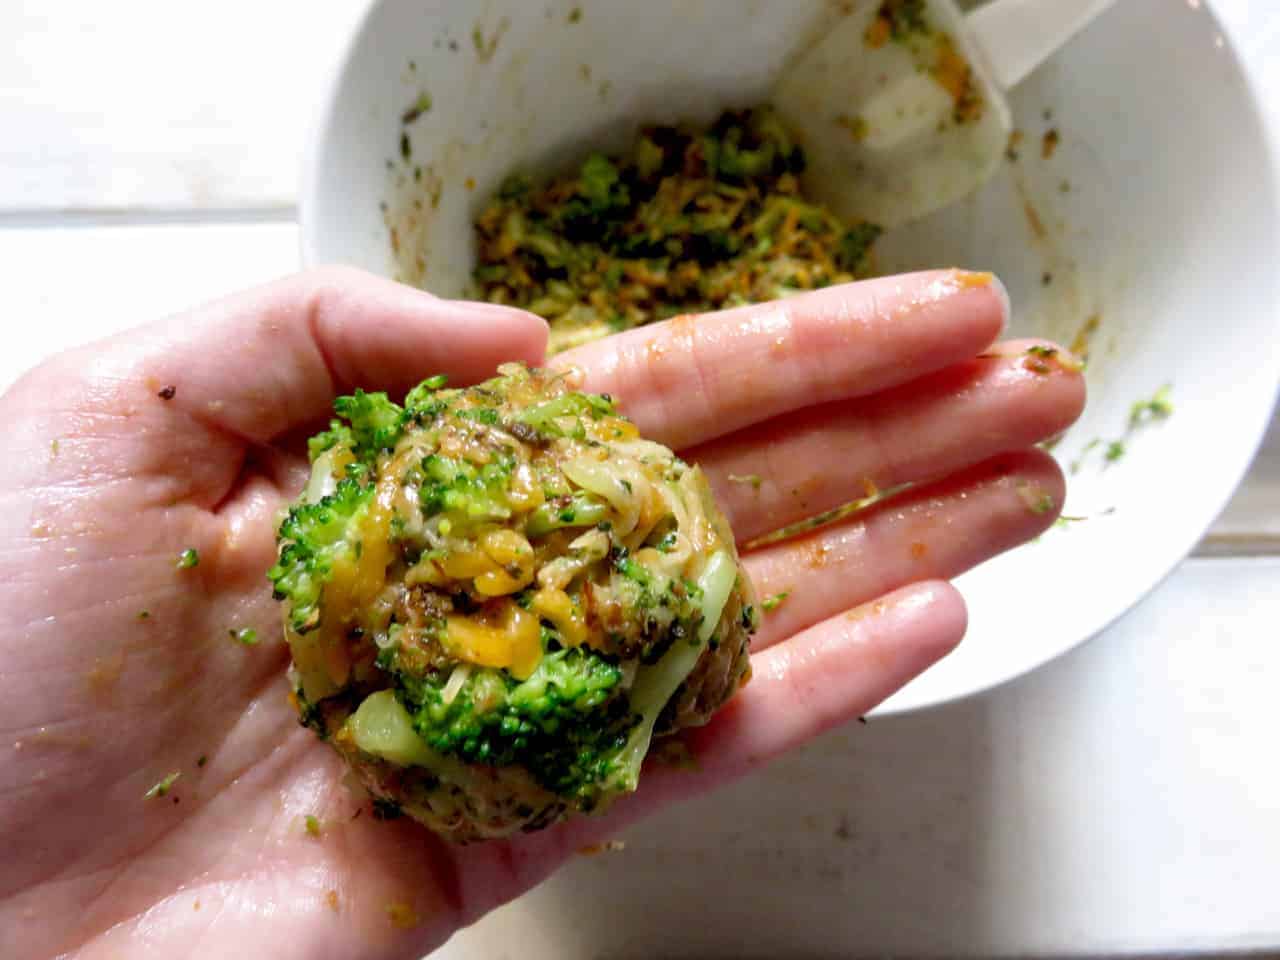 This is a hand holding a broccoli cheddar mixture that was formed into a small patty. A white bowl is in the background with more broccoli cheddar mixture. 